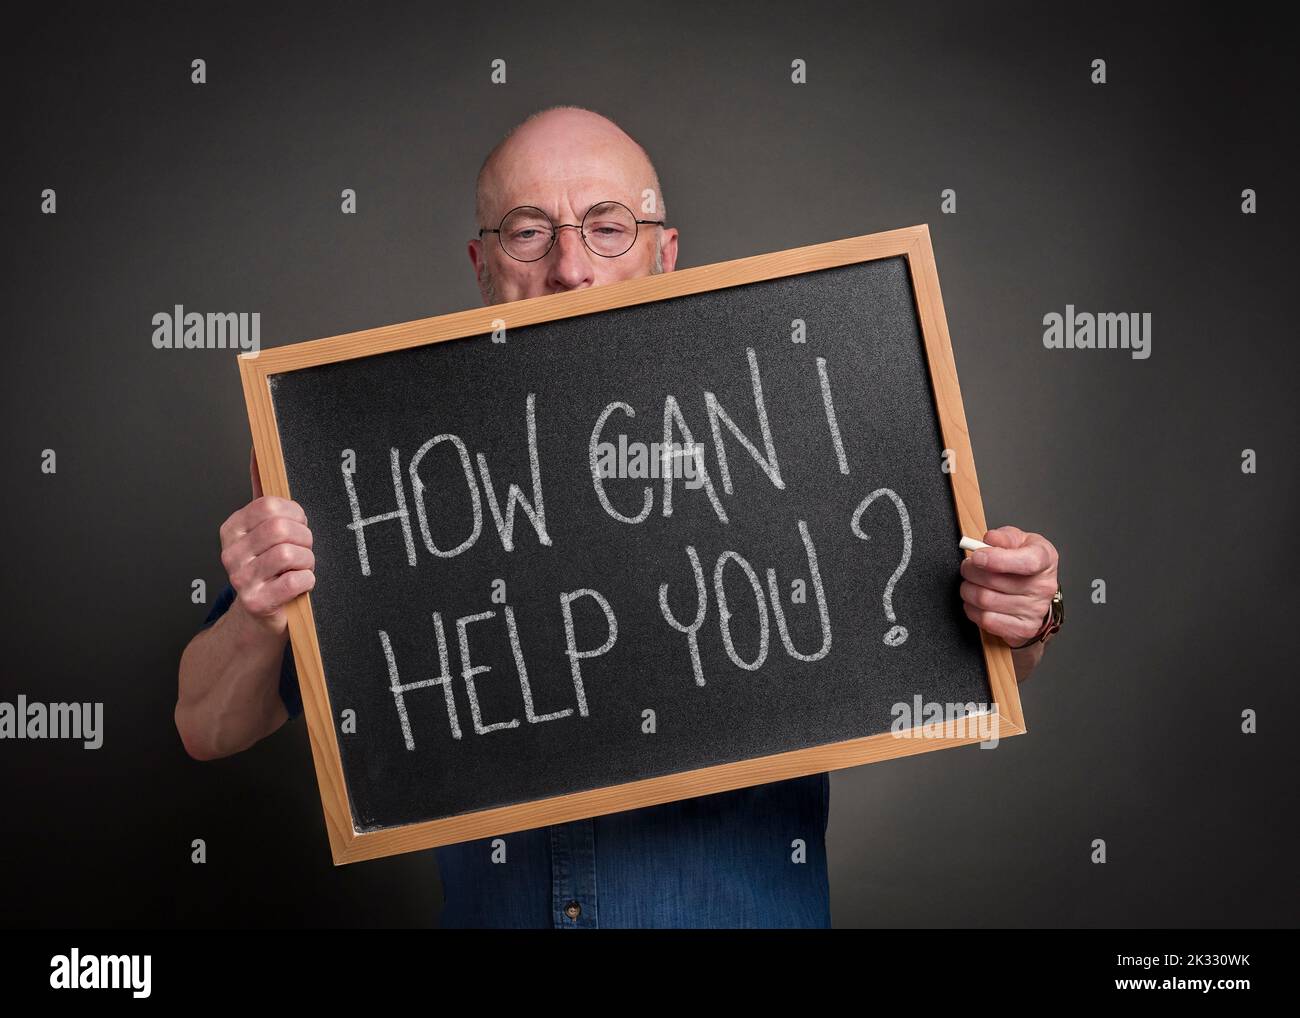 How can I help you? Senior man, teacher, mentor or presenter with a blackboard sign, education, presentation and business communication concept. Stock Photo